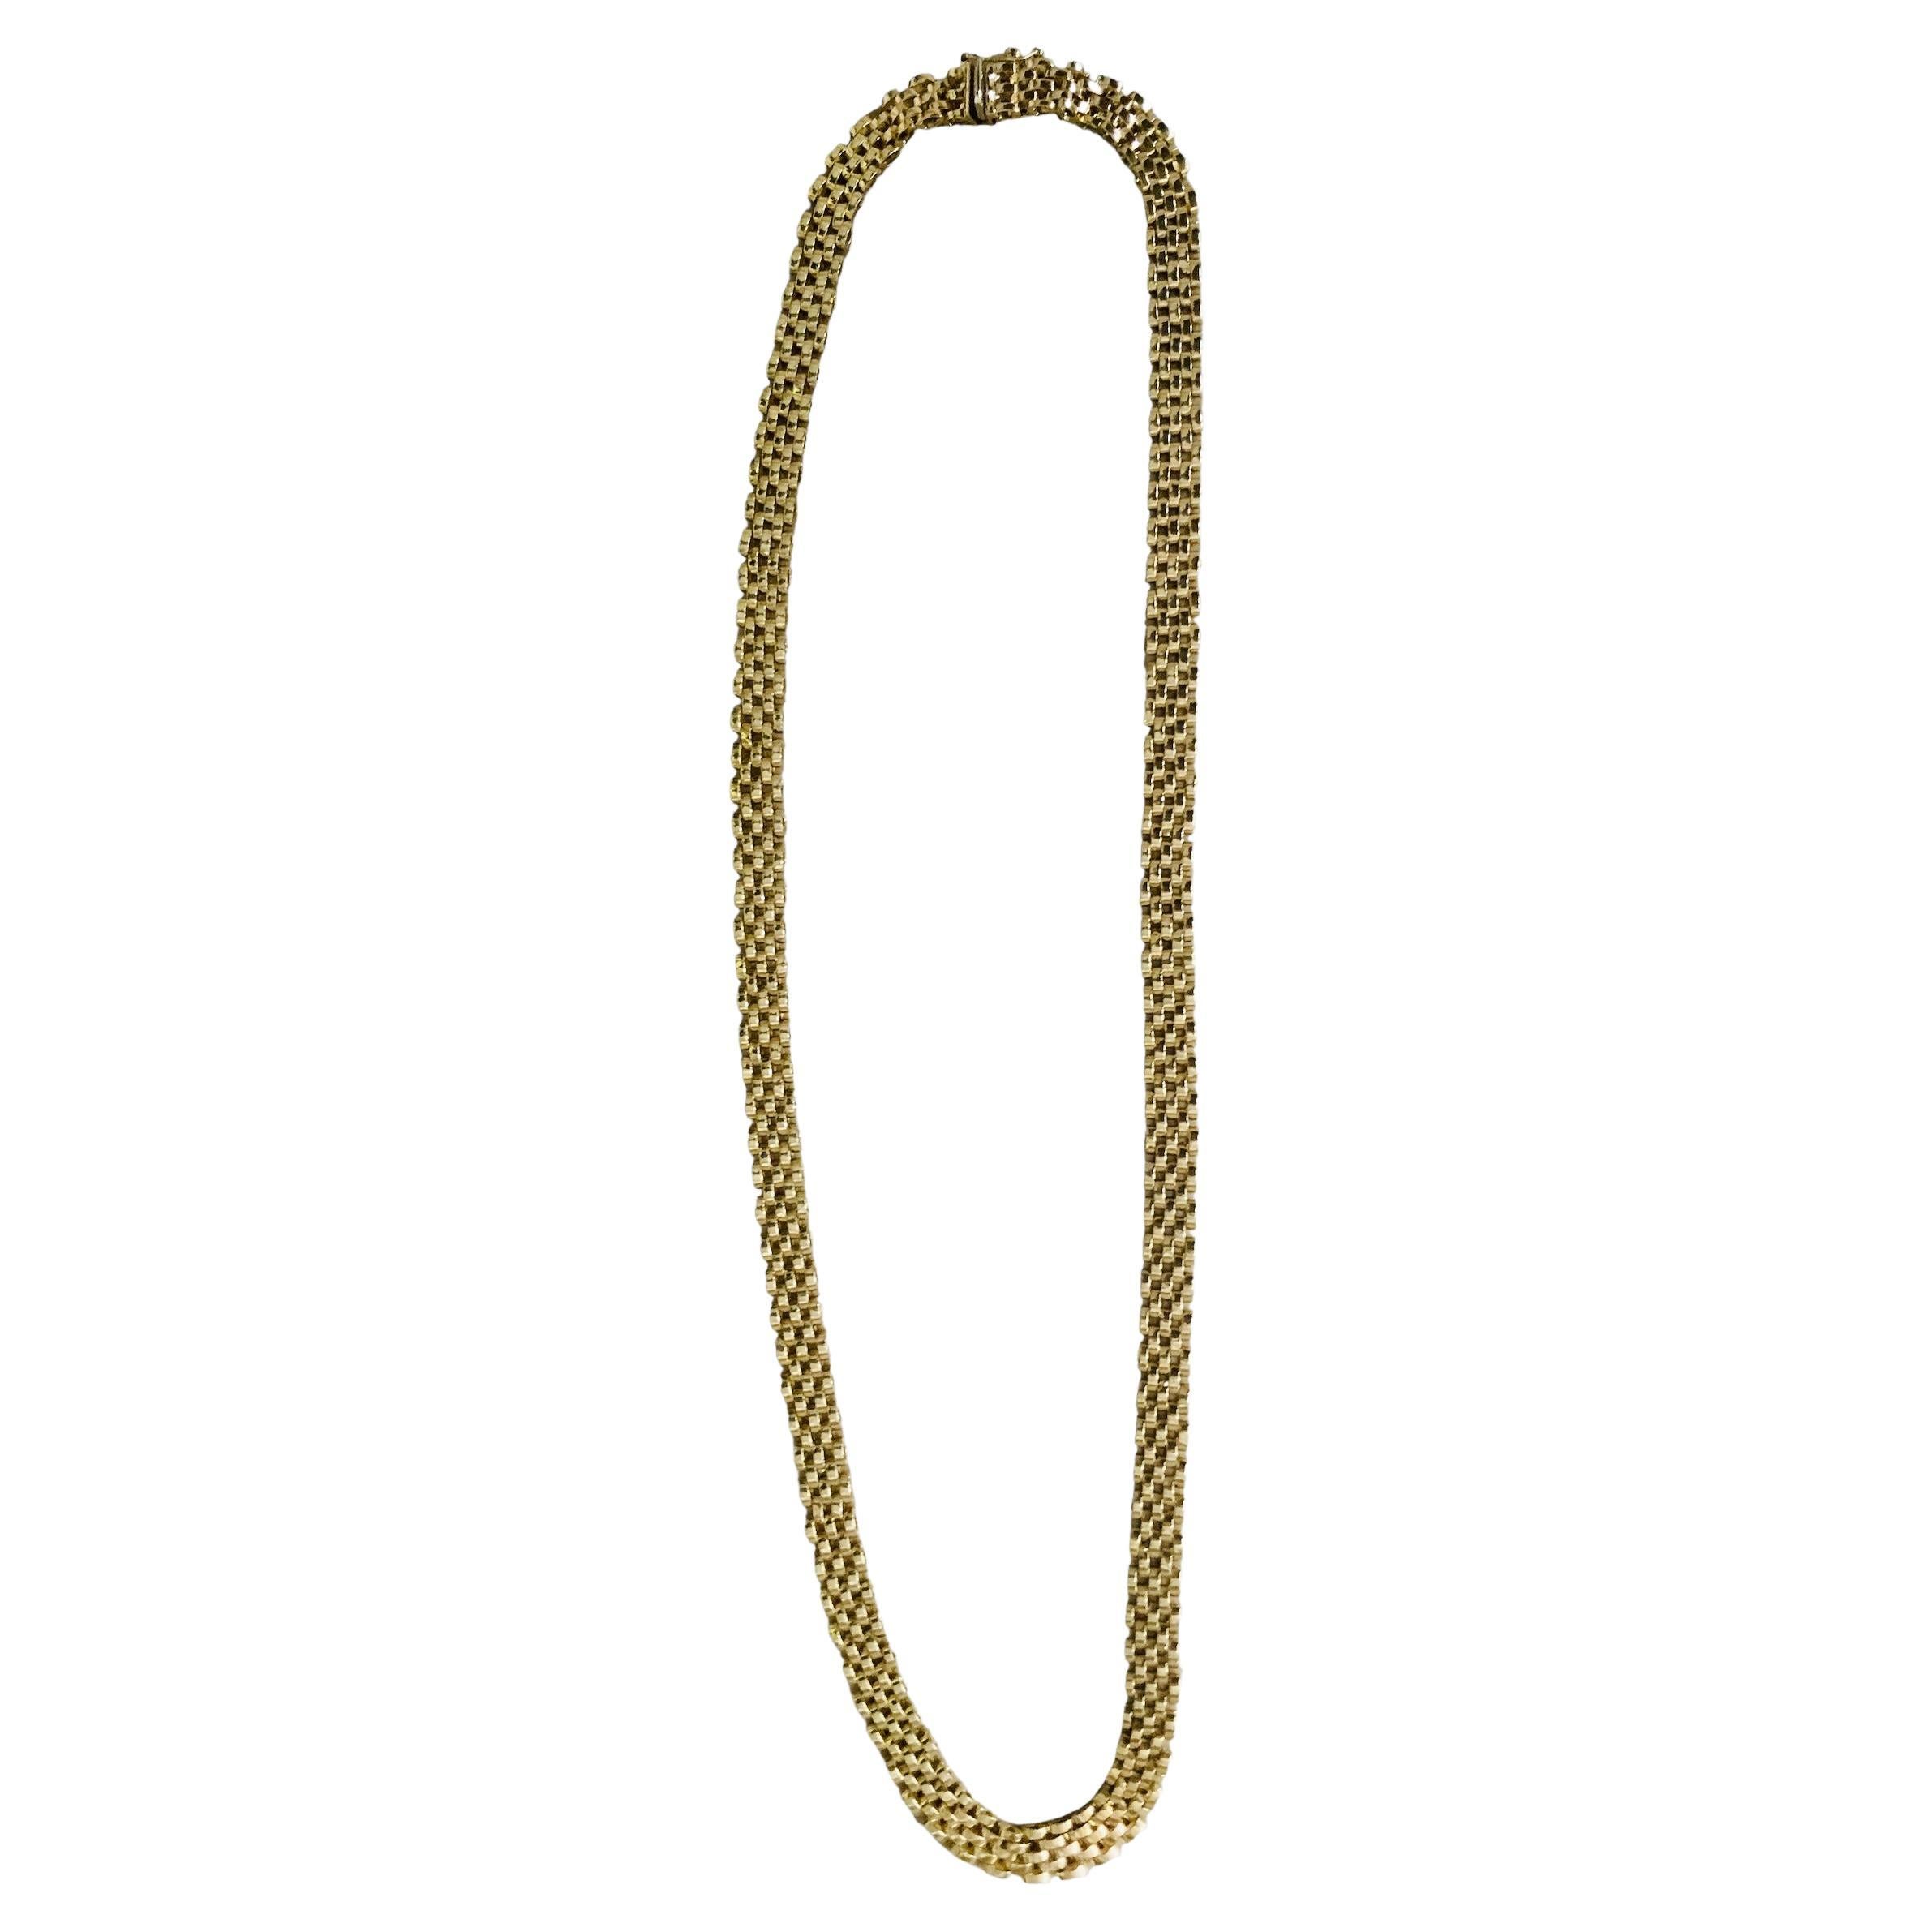 Italian 14K Gold Lady’s Panther Necklace 